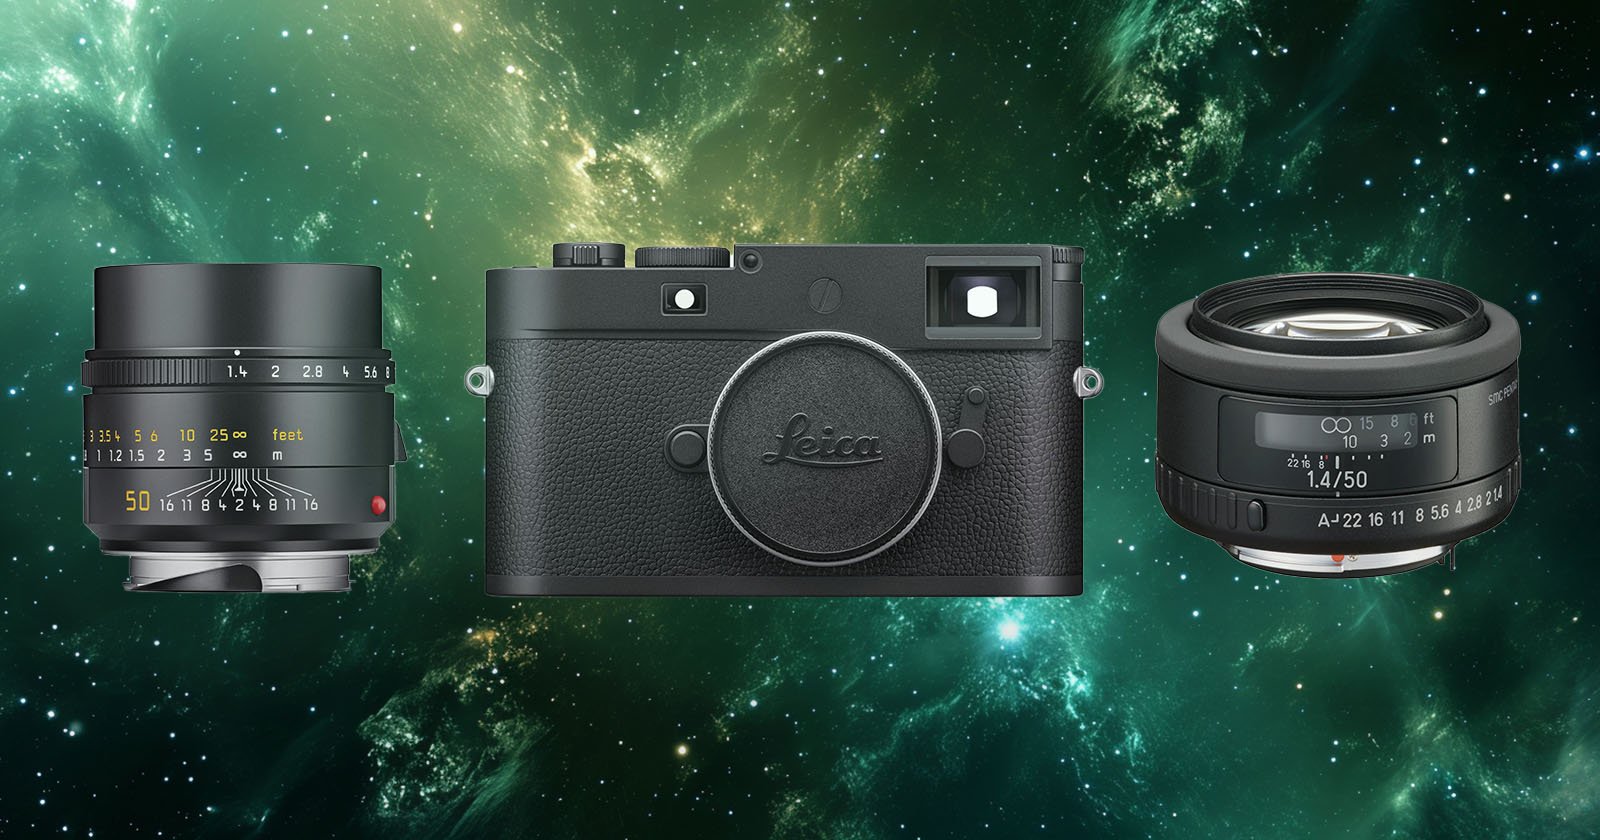 5 Best High-End Compact Cameras: Fujifilm, Sony, Ricoh, Leica, and Canon